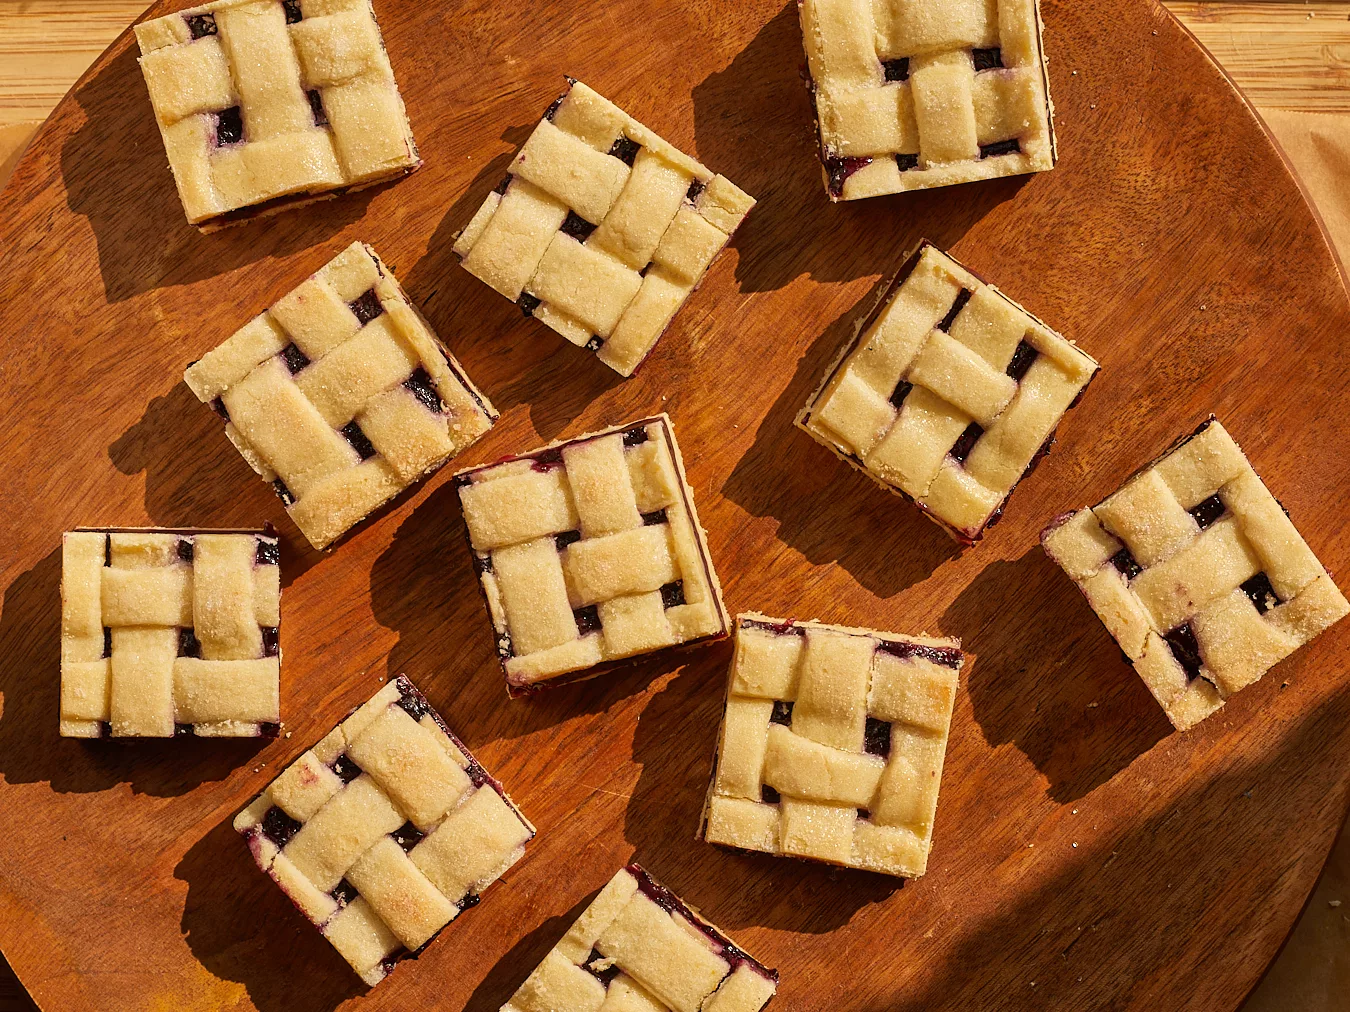 blueberry pie bars with lattice top sliced into squares on a wood background